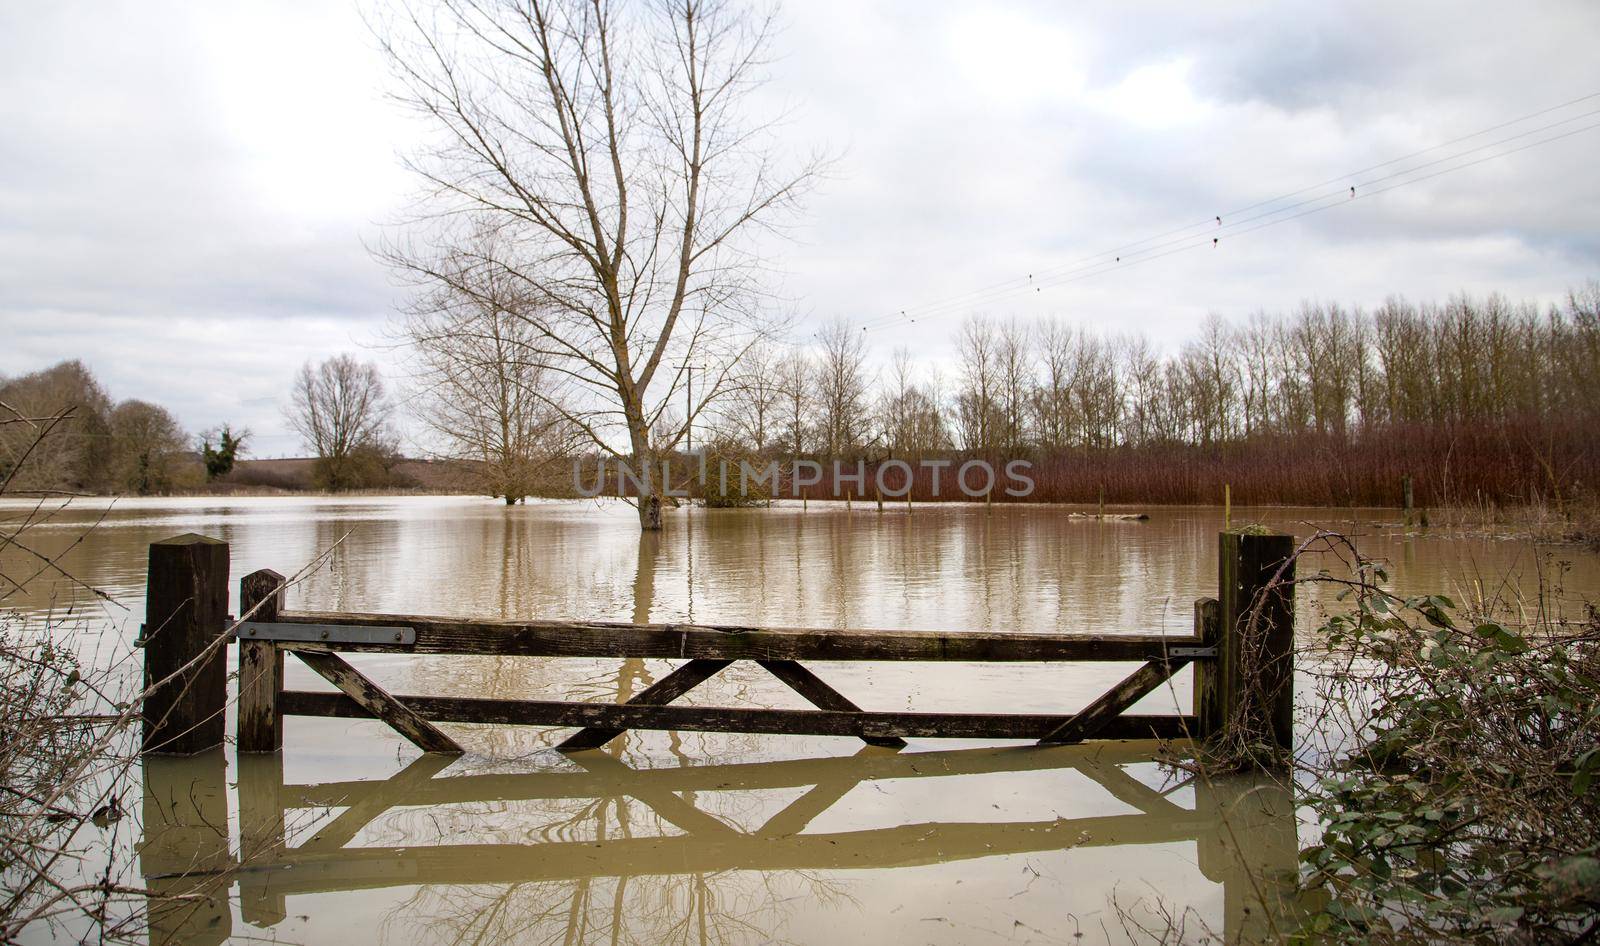 Flooded agricultural farm fields with wooden gate, sky, reflection in water, soaked field. High water in spring, UK, Suffolk spring 2021